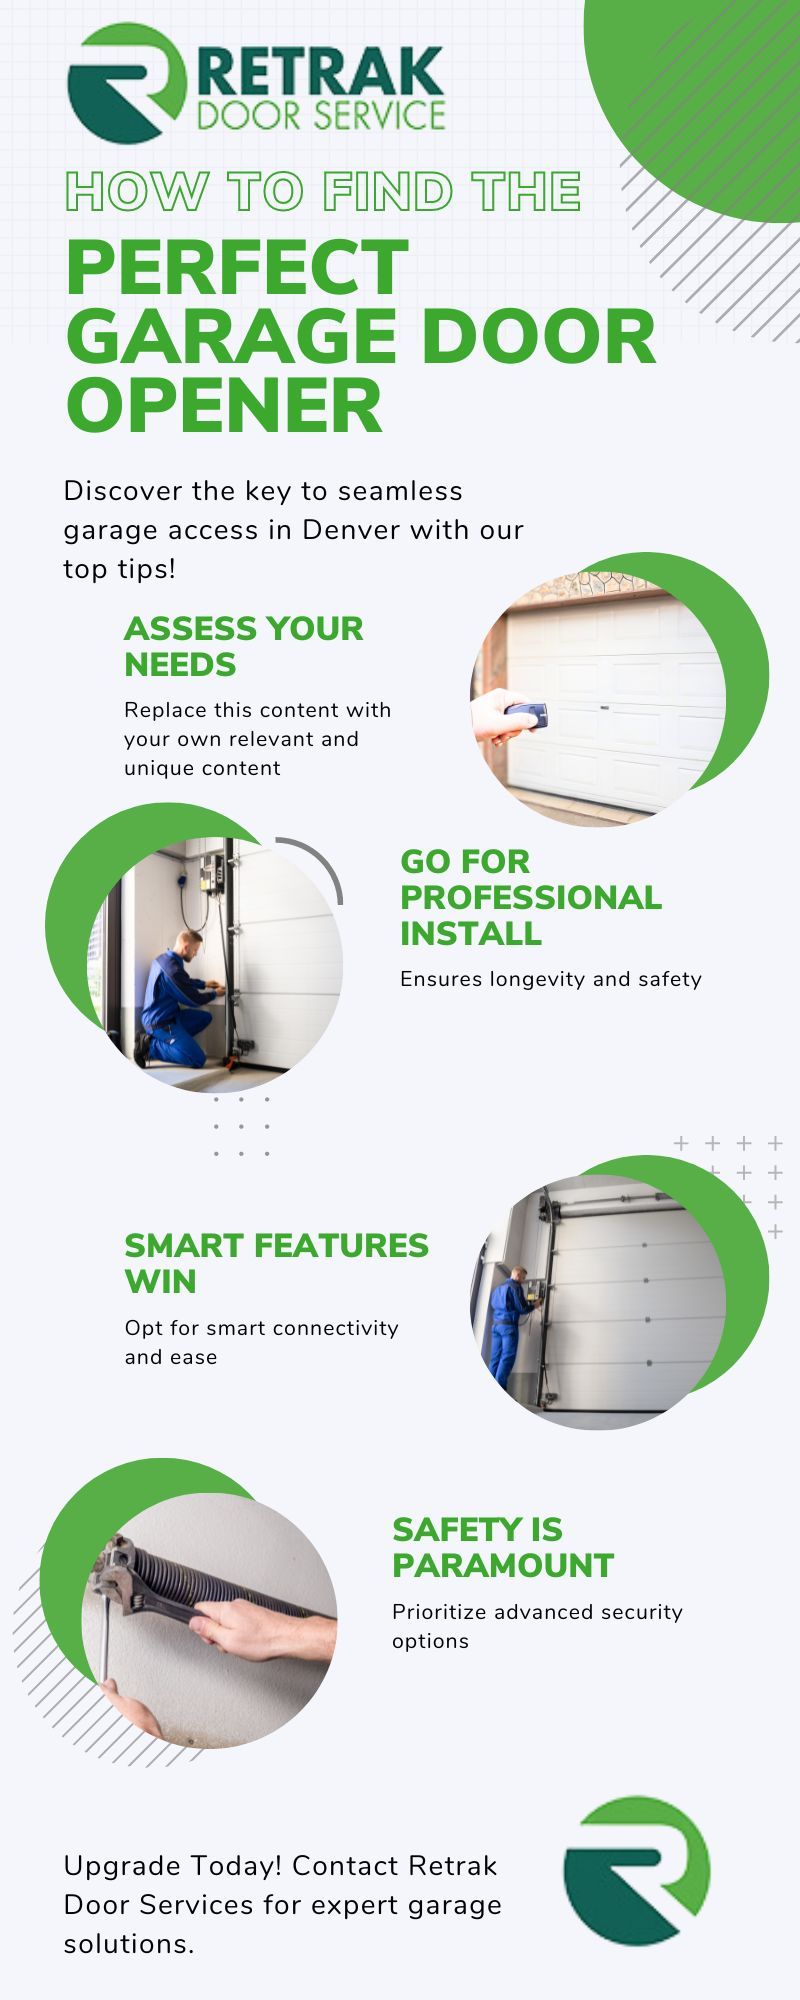 An infographic showing tips for picking a garage door opener